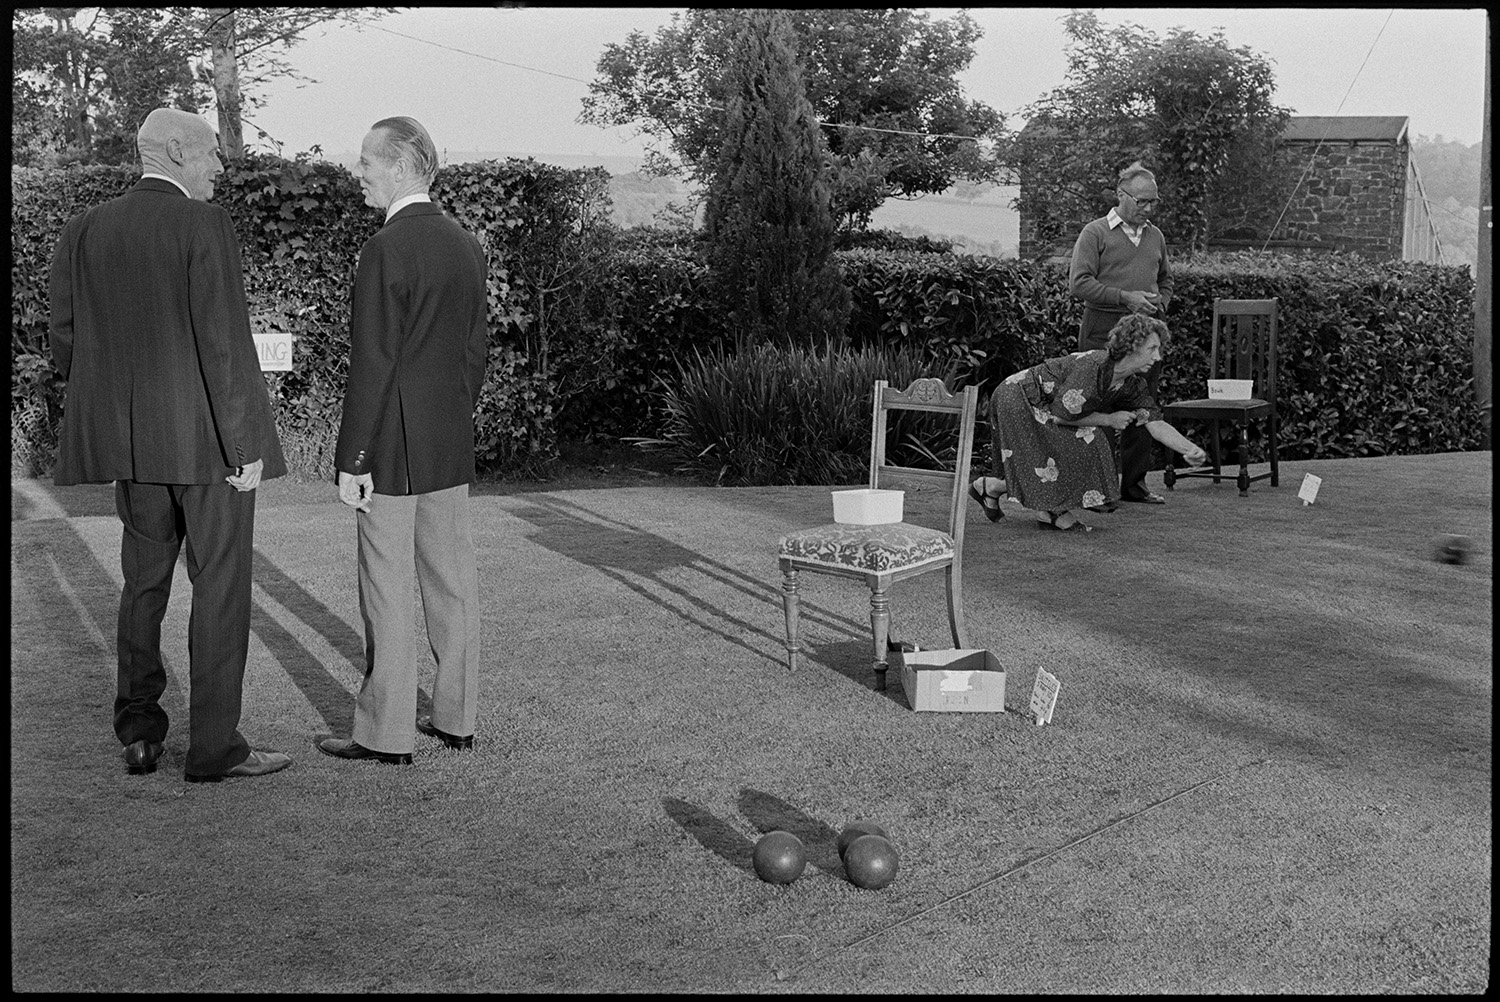 Sideshows at garden fete, bowls, hoop la, billiards, golf. 
[A man and woman playing bowls on the lawn at a fete at the Old Rectory, Merton. Two other men are talking in the foreground by a chair and another set of bowls. Shadows  from the chair and people are falling on the grass.]